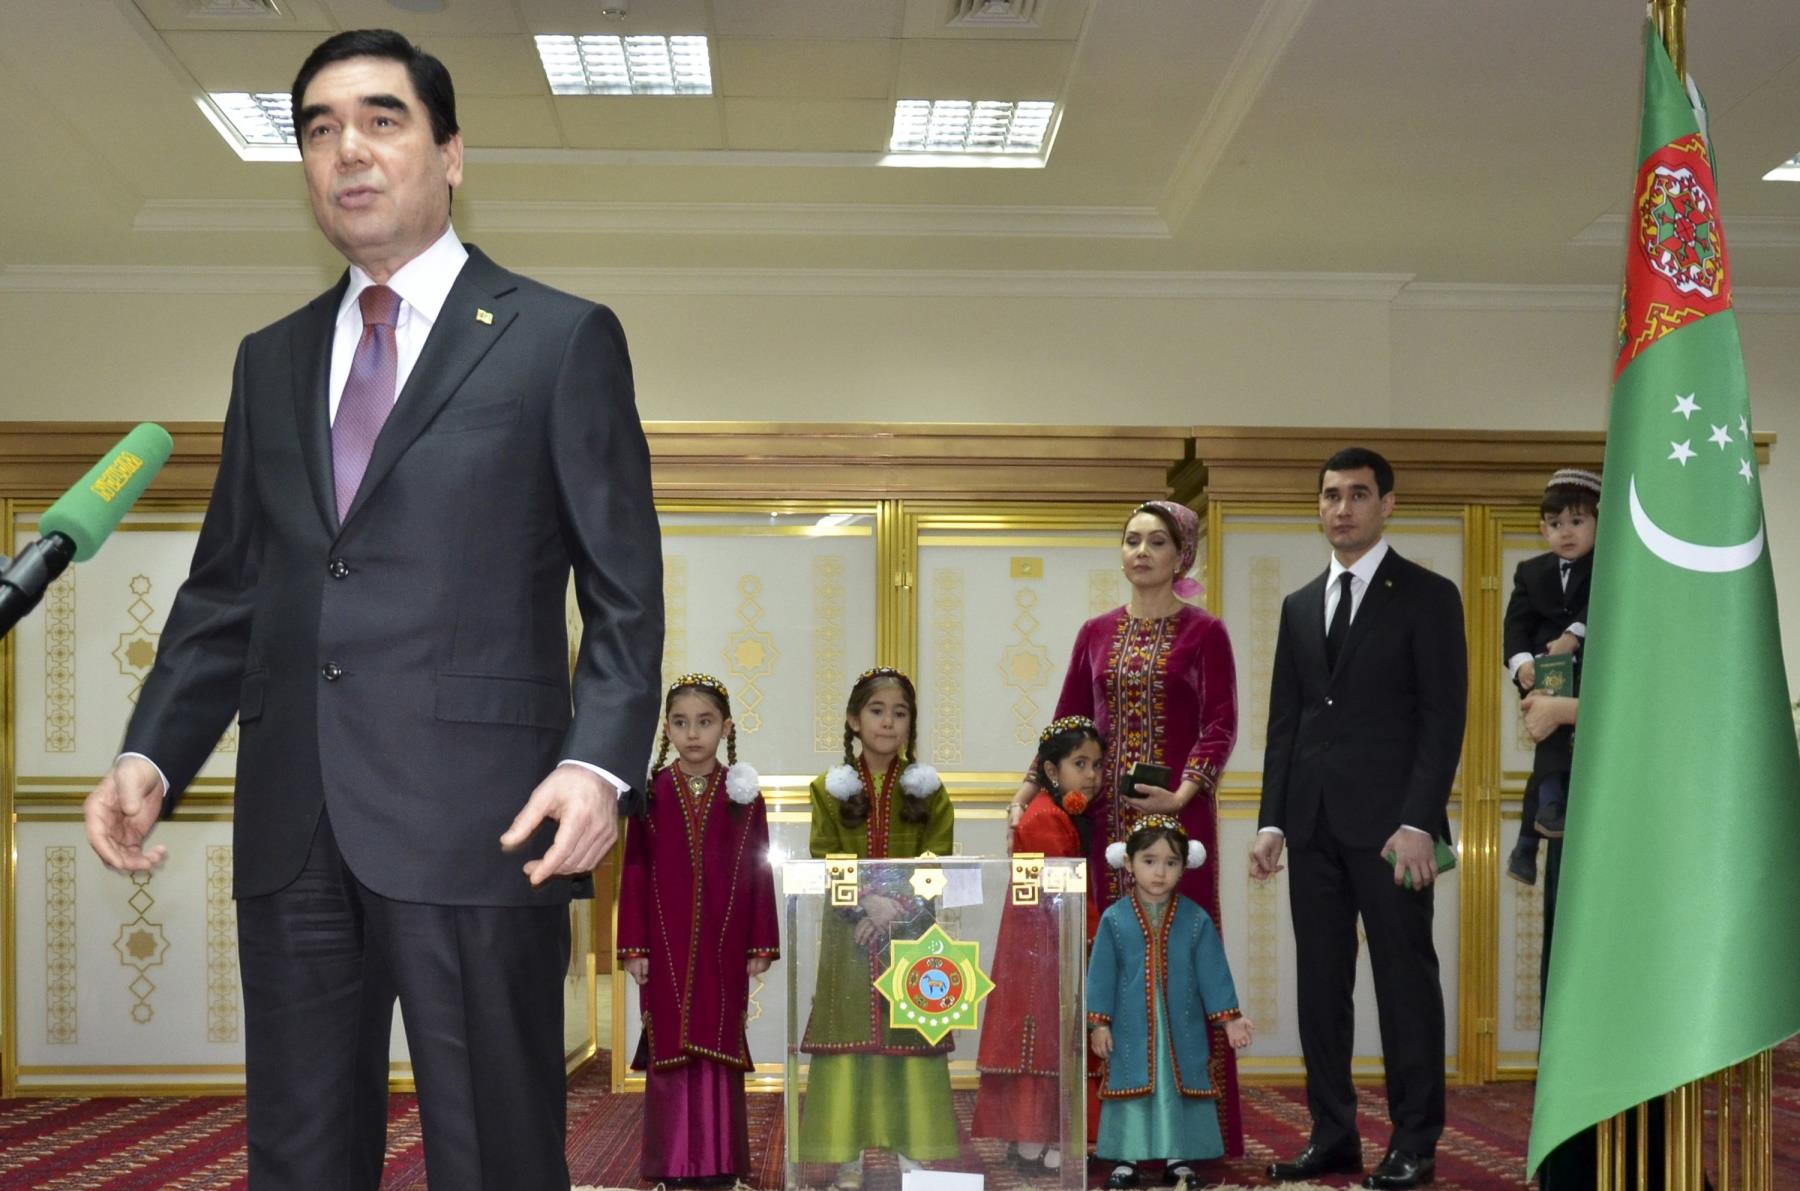 Turkmenistan President Gurbanguly Berdimuhamedov (L), speaks to journalists after casting his ballot as his son Serdar Berdymukhamedov, (2-R), with other family members look on at a polling station in Ashgabat, Turkmenistan, Feb. 12, 2017. (AP Photo)